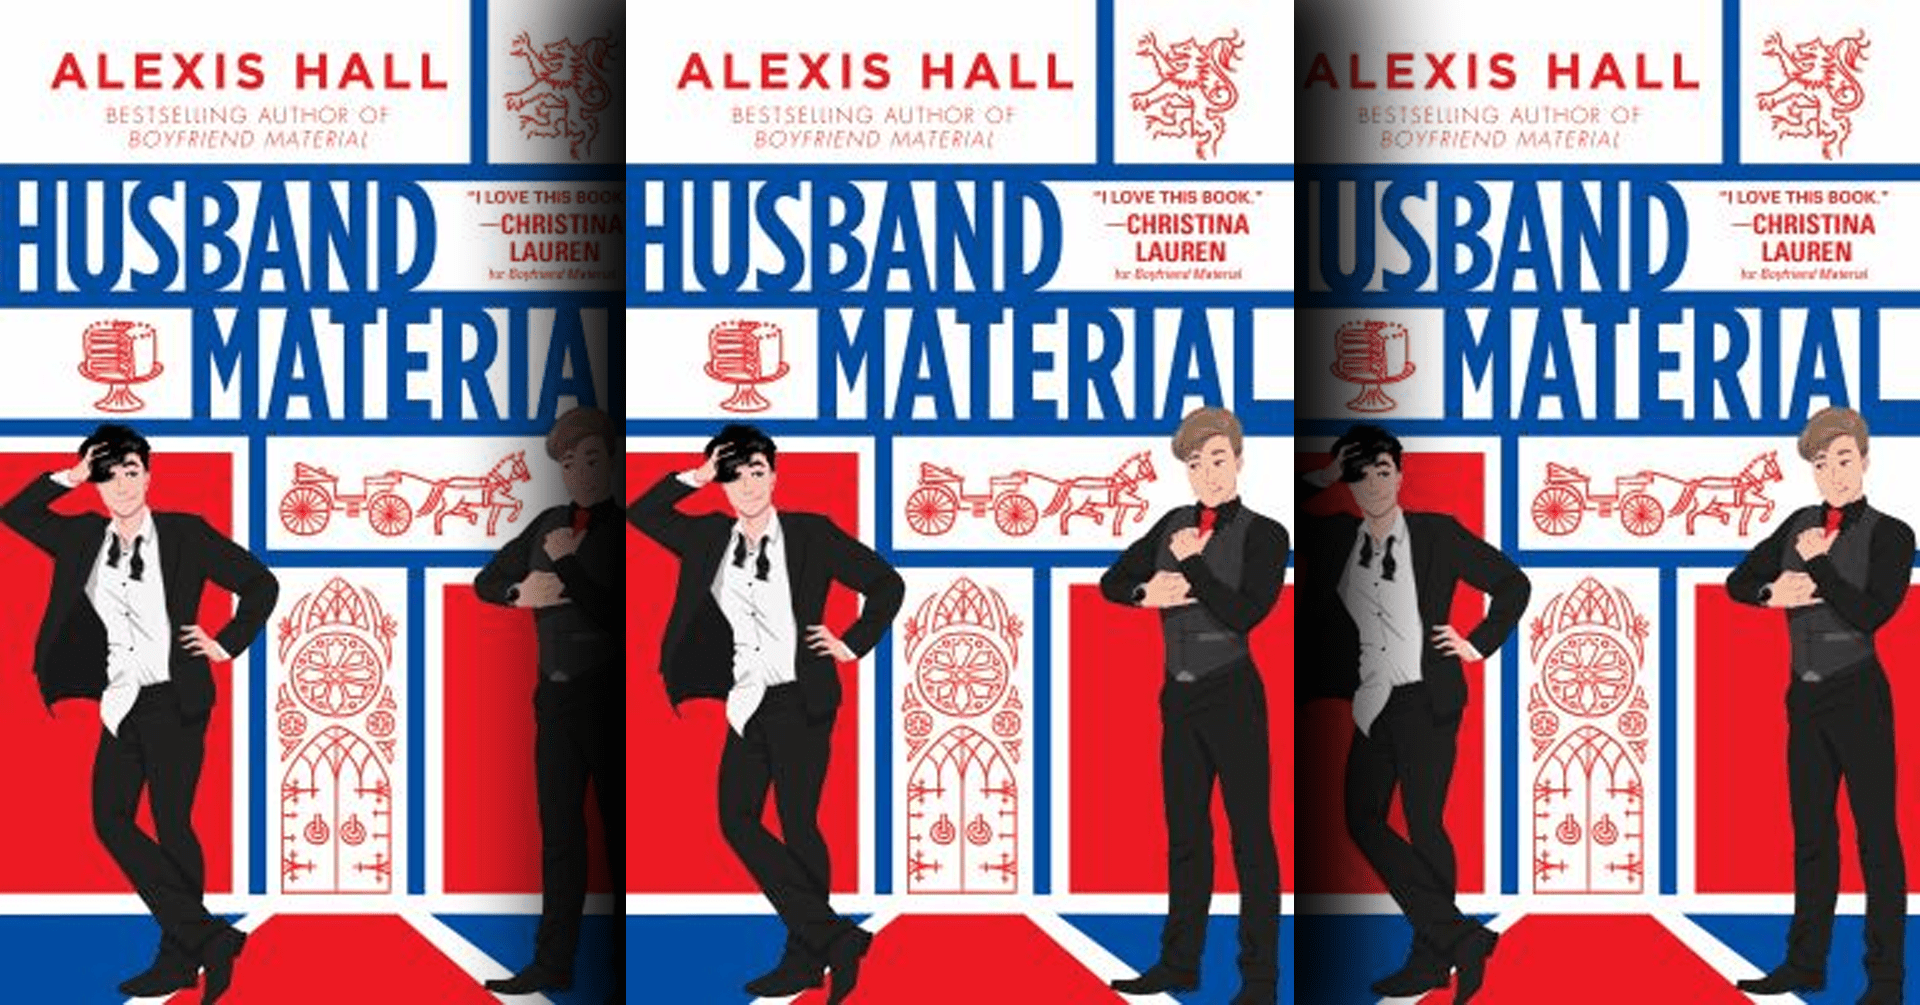 Husband Material by Alexis Hall (book cover)